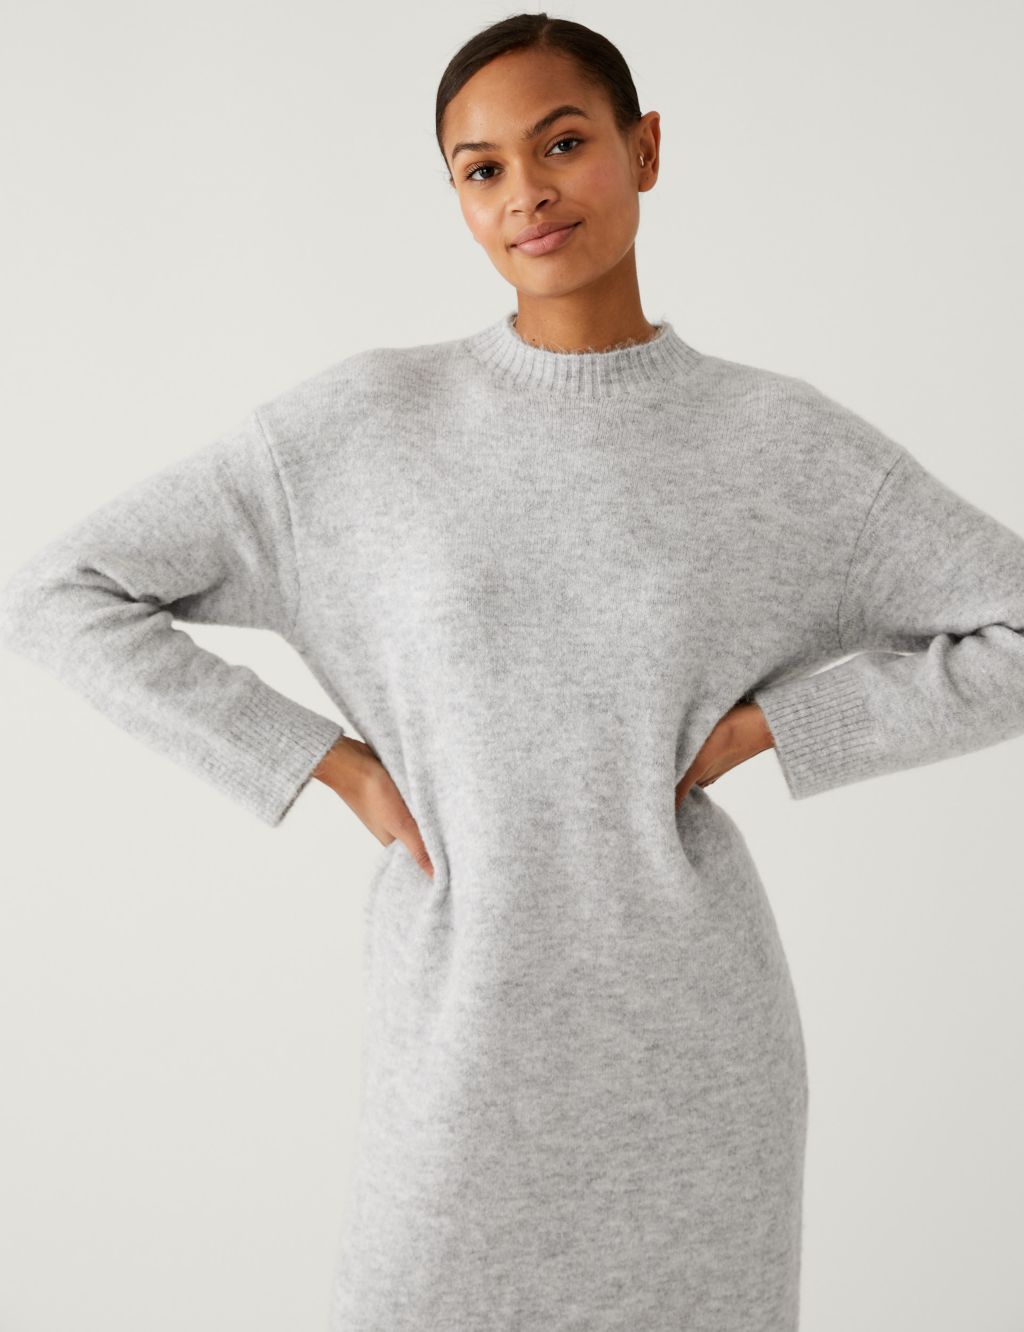 Knitted Crew Neck Dress image 3